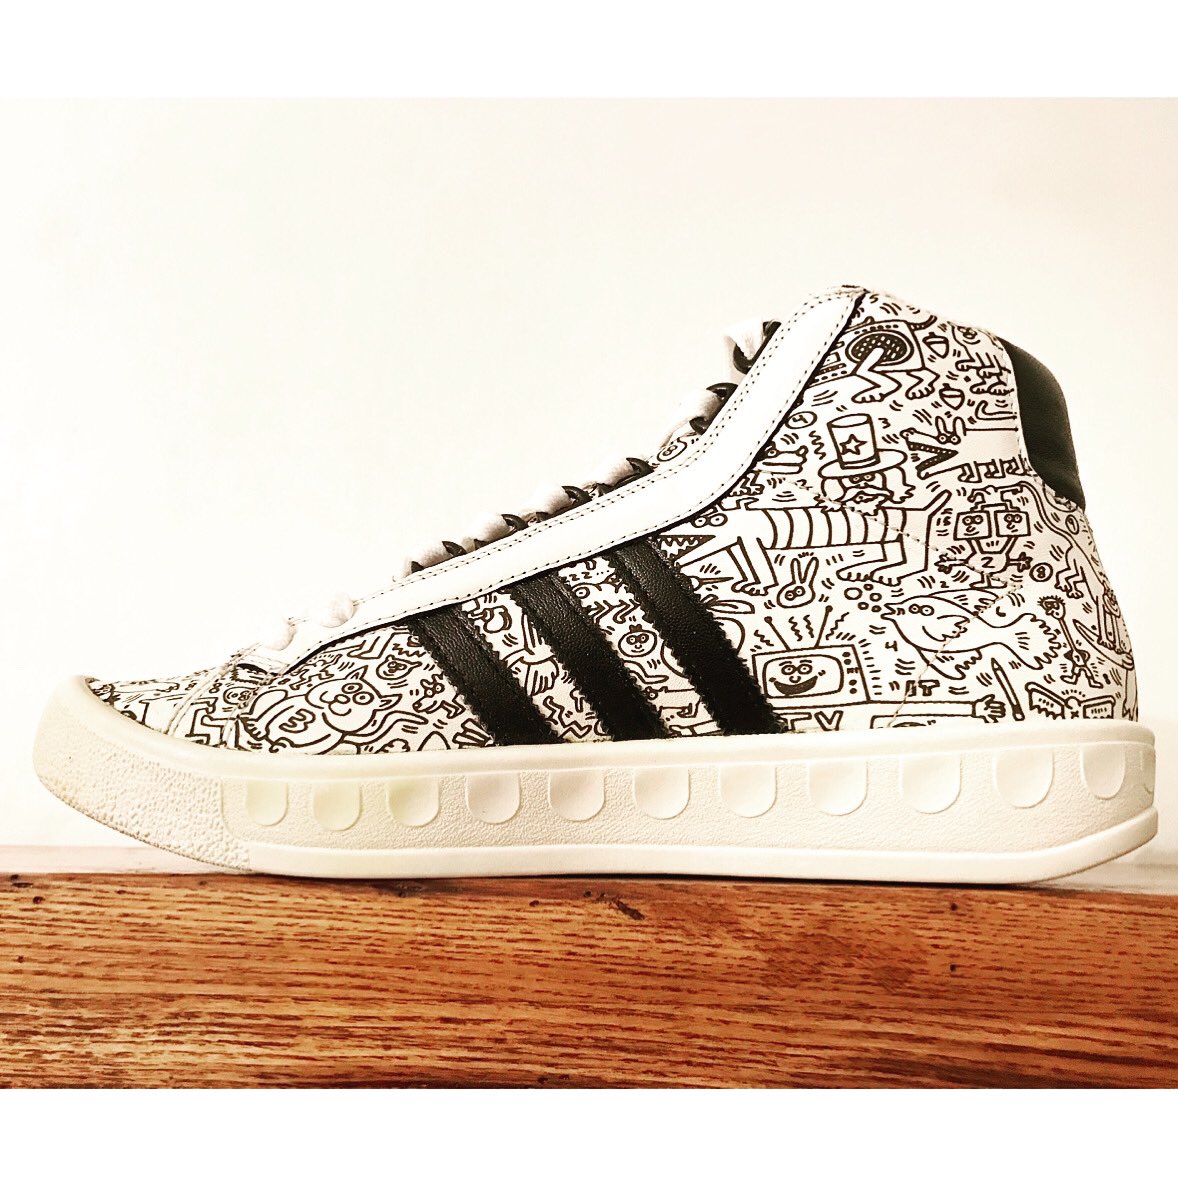 Keith Haring Foundation on Twitter: "Jeremy Scott X Keith Haring Adidas  collab. 2006...SUPER early to the collab game. 🖤🤍🖤🤍🖤🤍🖤🤍 #keithharing  #haring #jeremyscott #adidas #adicolor #sneakers #sneakerhead #collab  https://t.co/o4rg488NNl" / Twitter